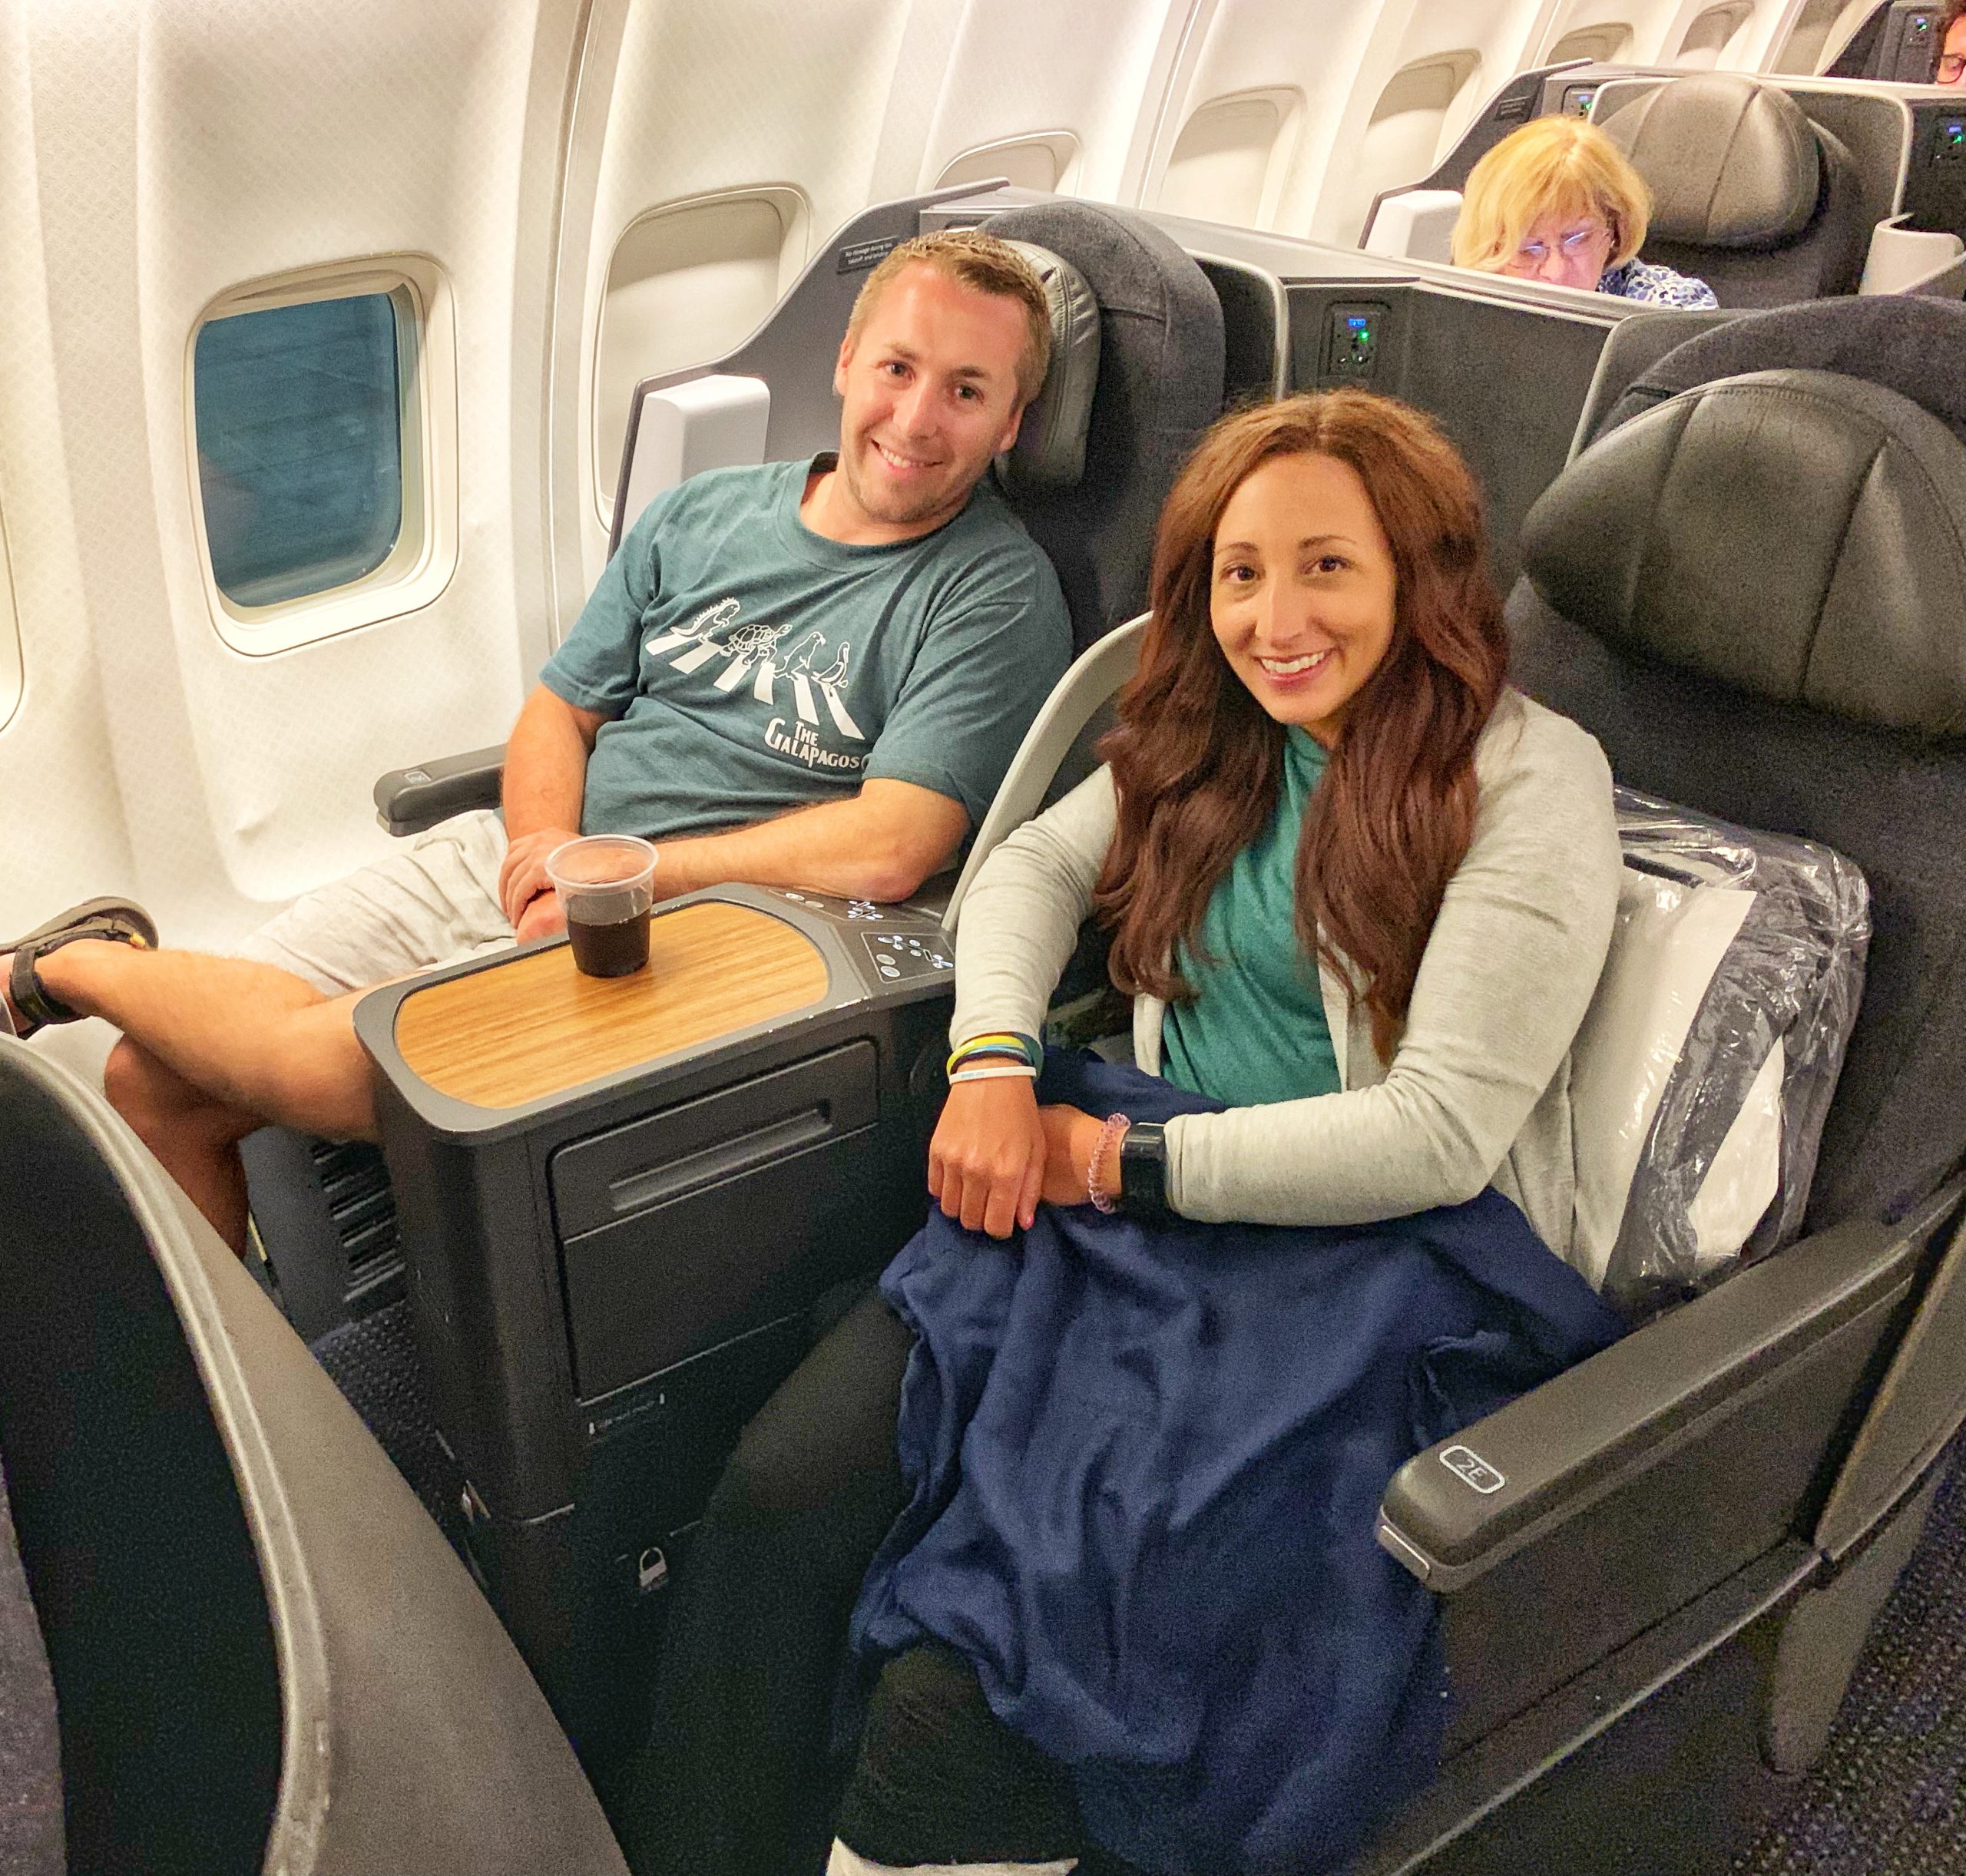 Couples sitting on airplane